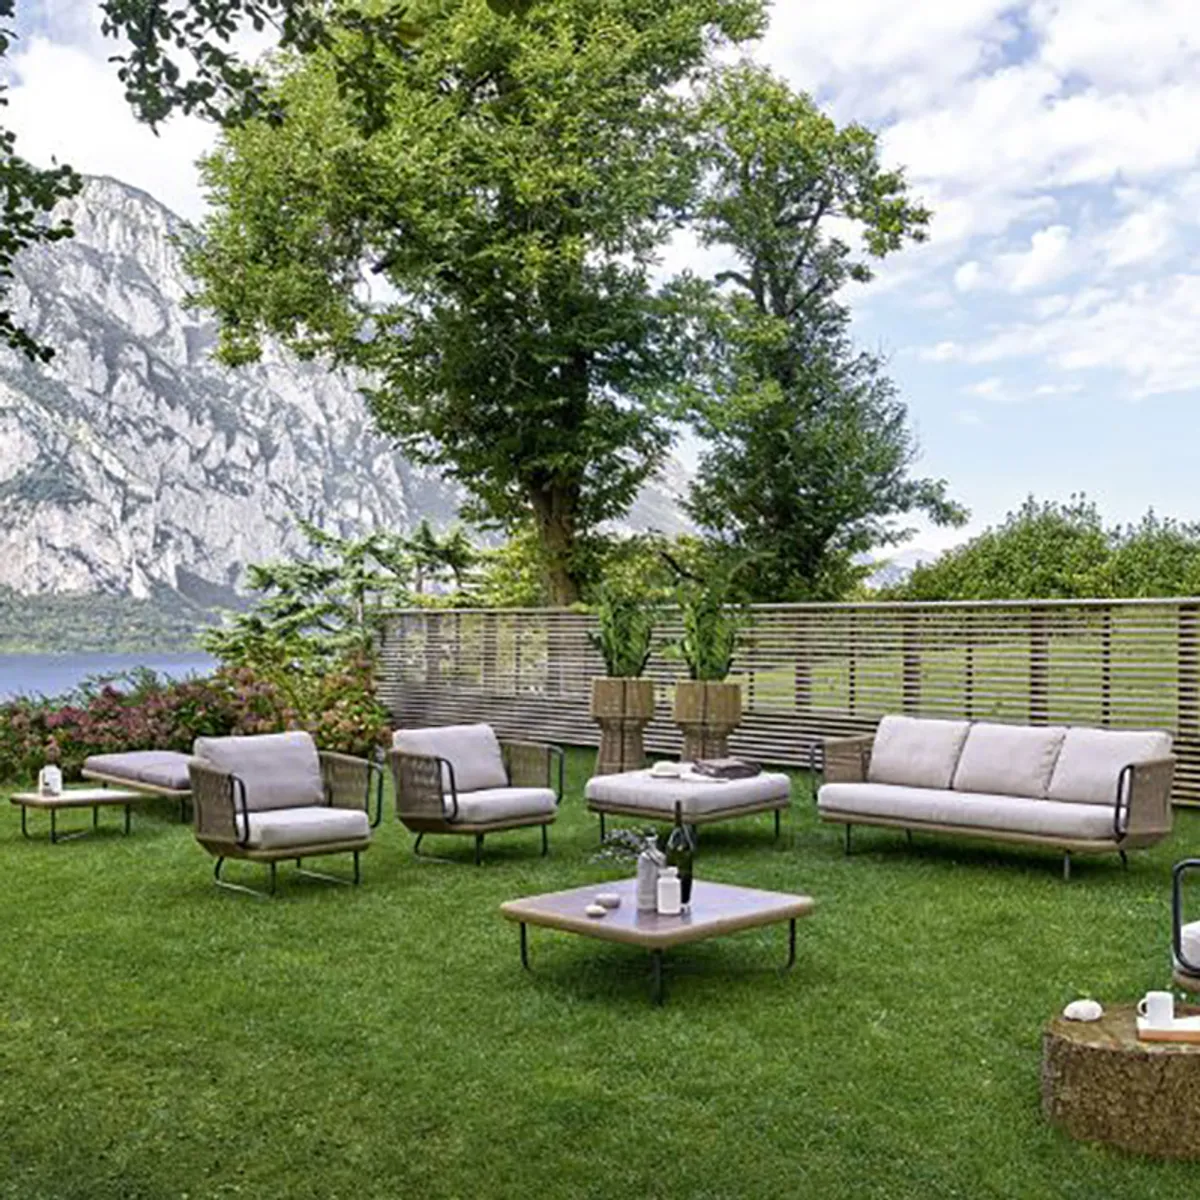 Babylon Collection Of Outdoor Seating For Hotel Gardens And Resort Patio Areas Insideoutcontracts 021